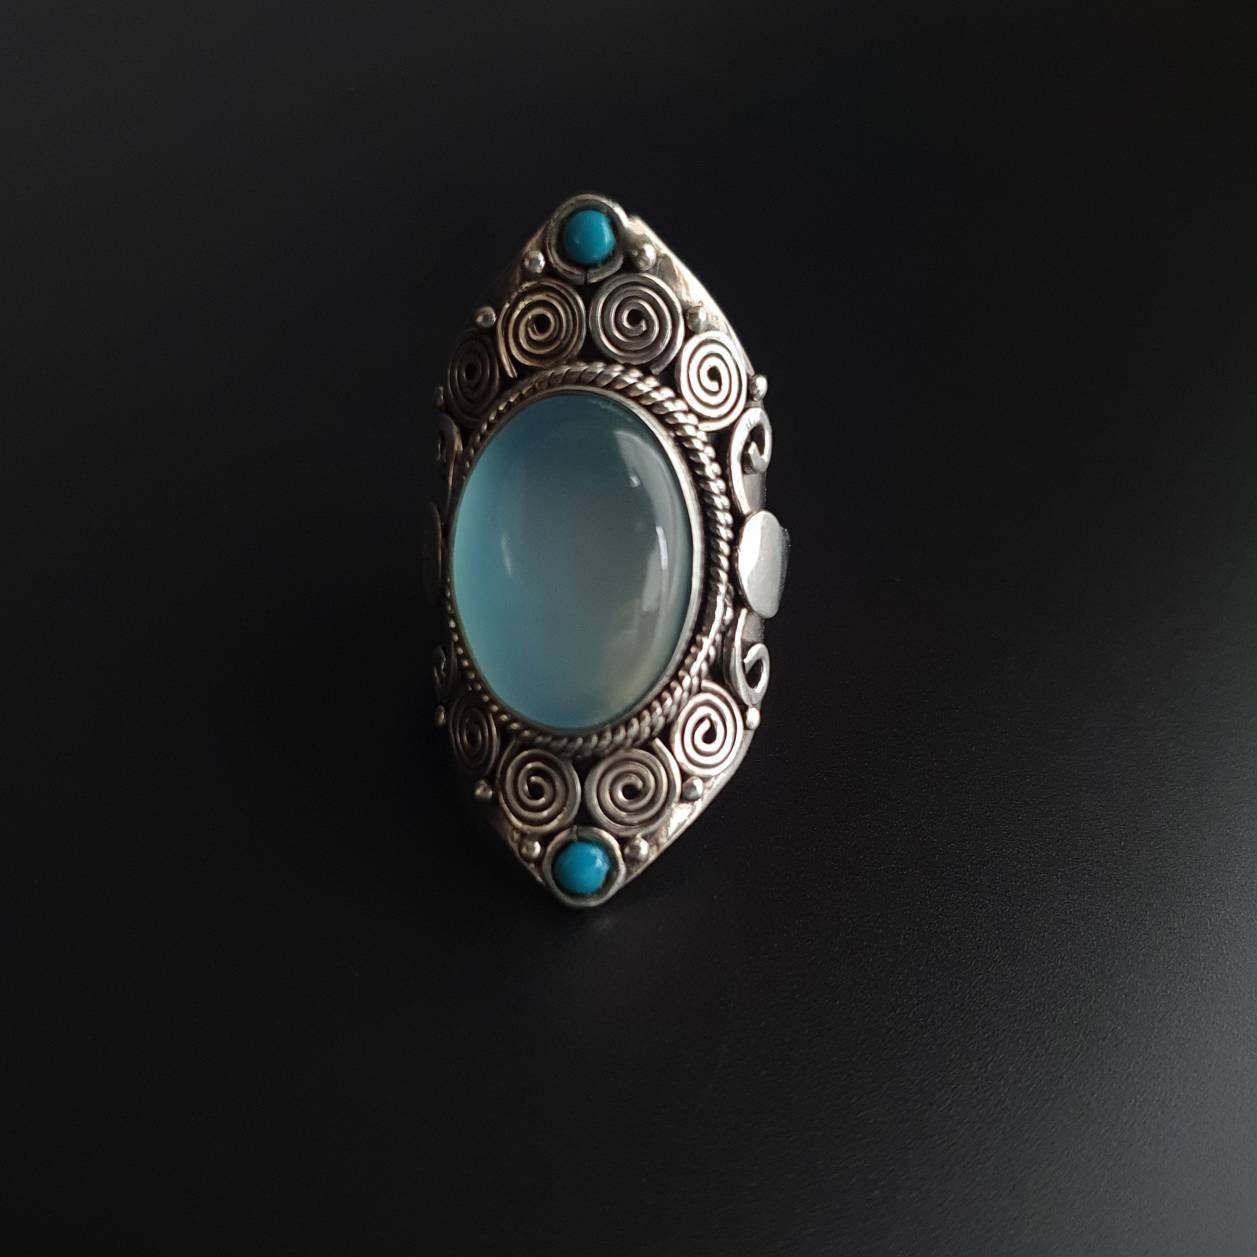 Silver ring, sterling, chalcedony,blue, filigree, authentic,rings, jewelry, gifts, vintage, handmade,luxury, fast shipping, exclusive,